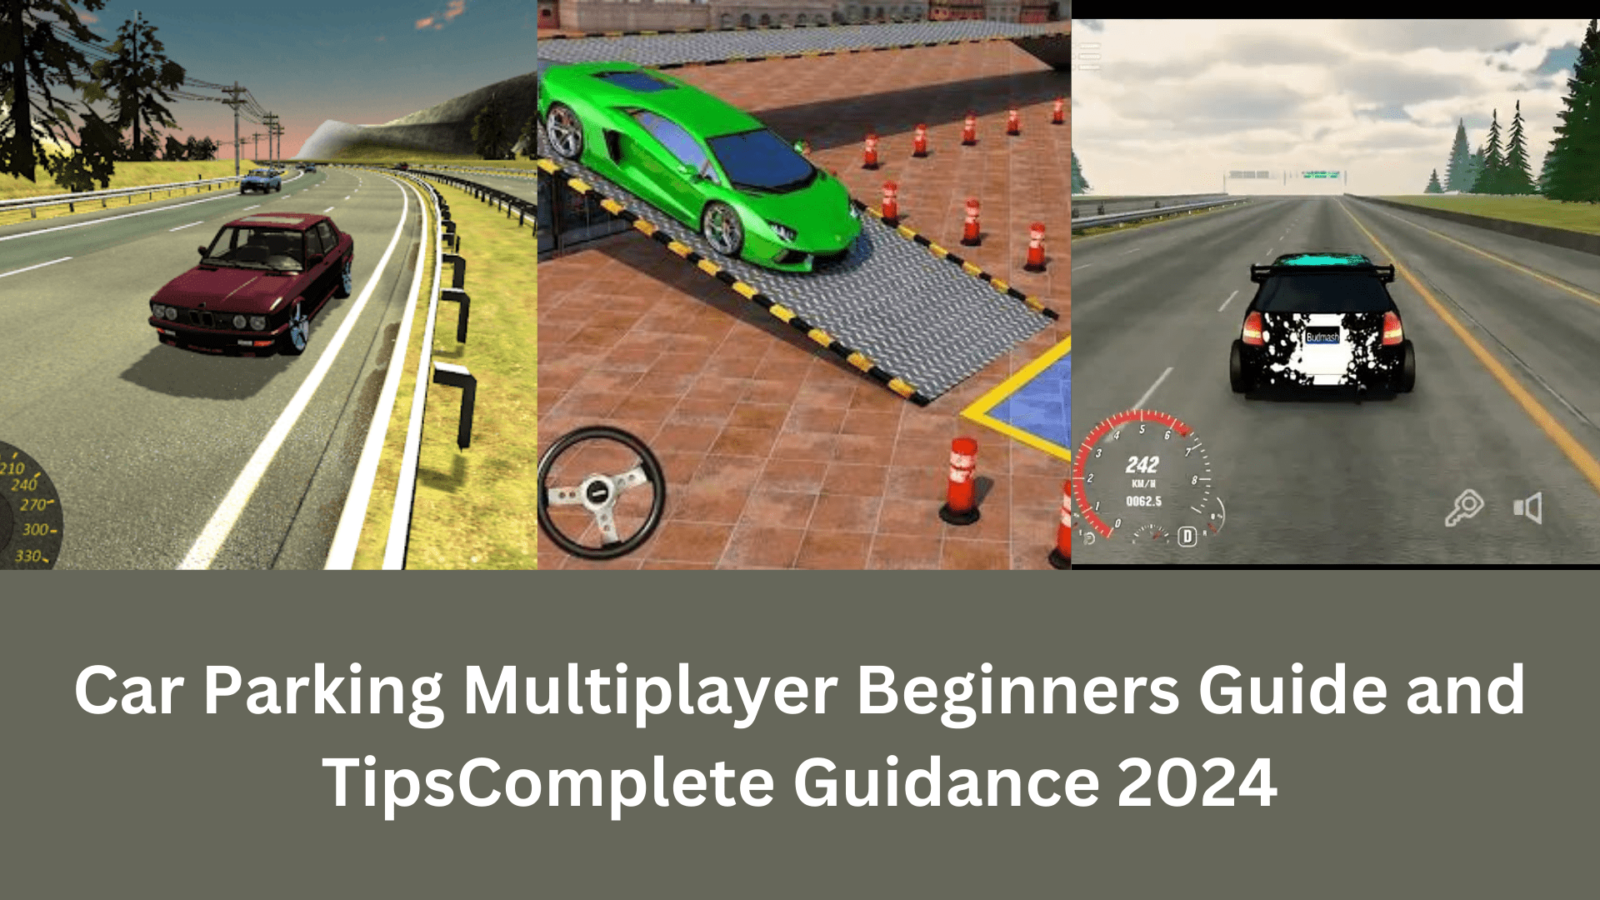 Car Parking Multiplayer Beginners Guide and Tips: Complete Guidance 2024